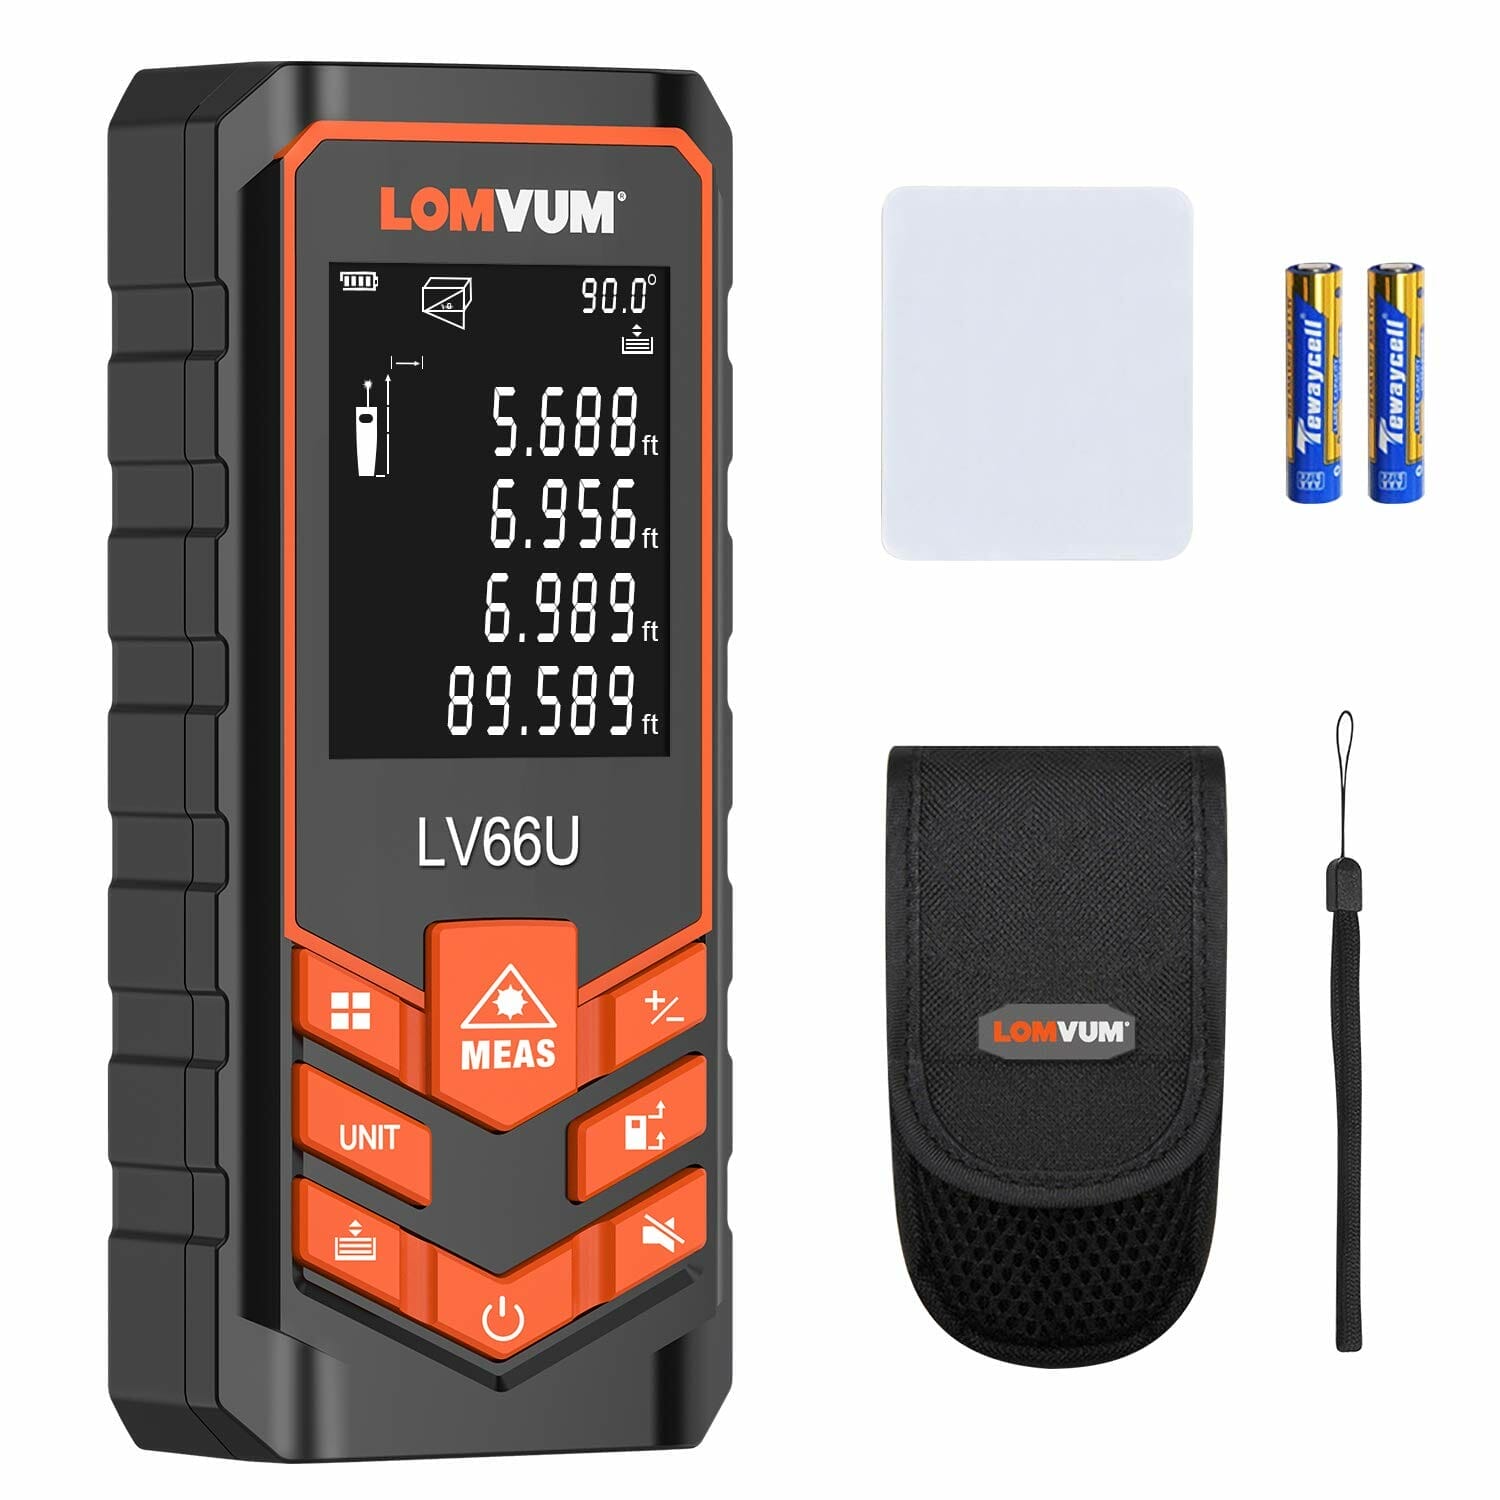 A LOMVUM Laser Measure Review showcasing a digital distance meter equipped with a battery and other accessories.